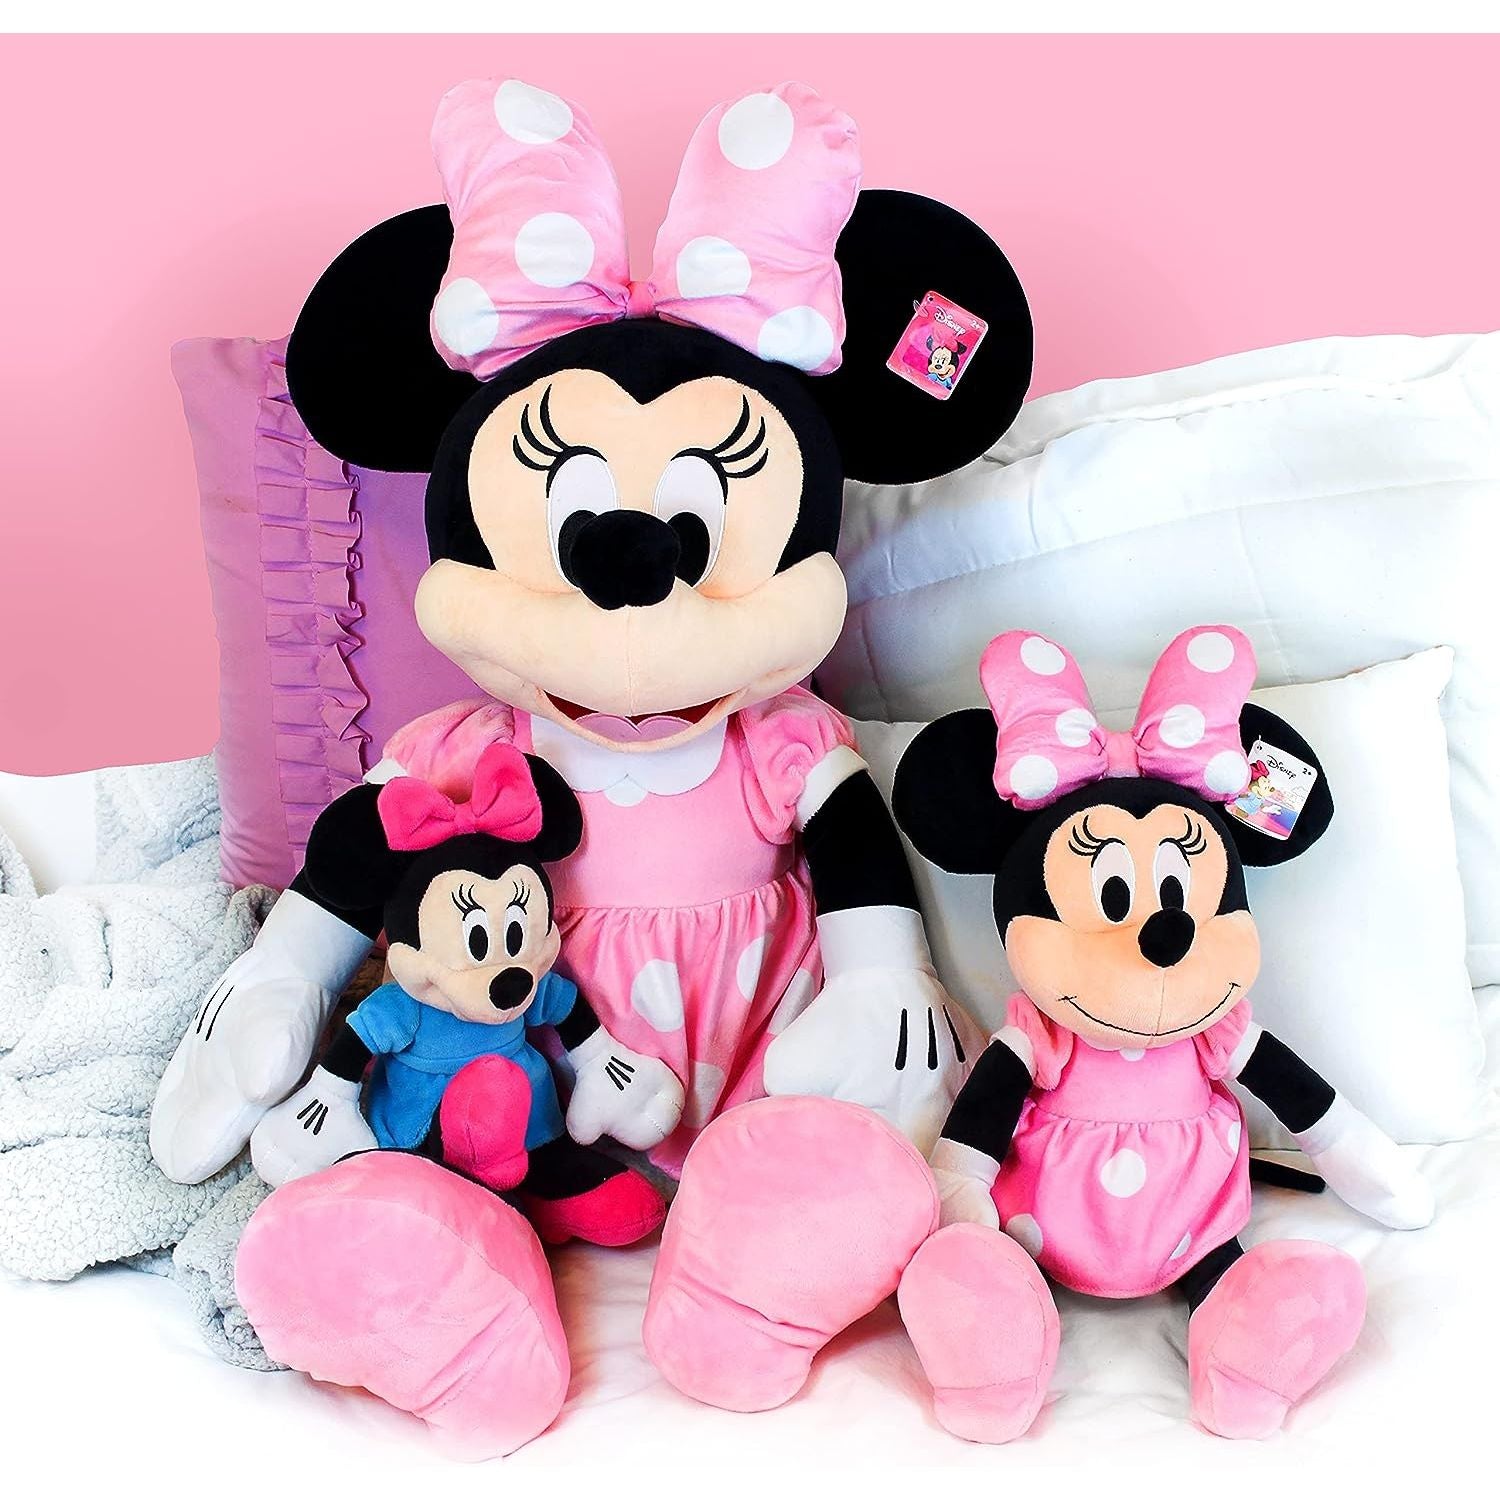 Disney Plush Showing all sizes of Minnie mouse - Heretoserveyou